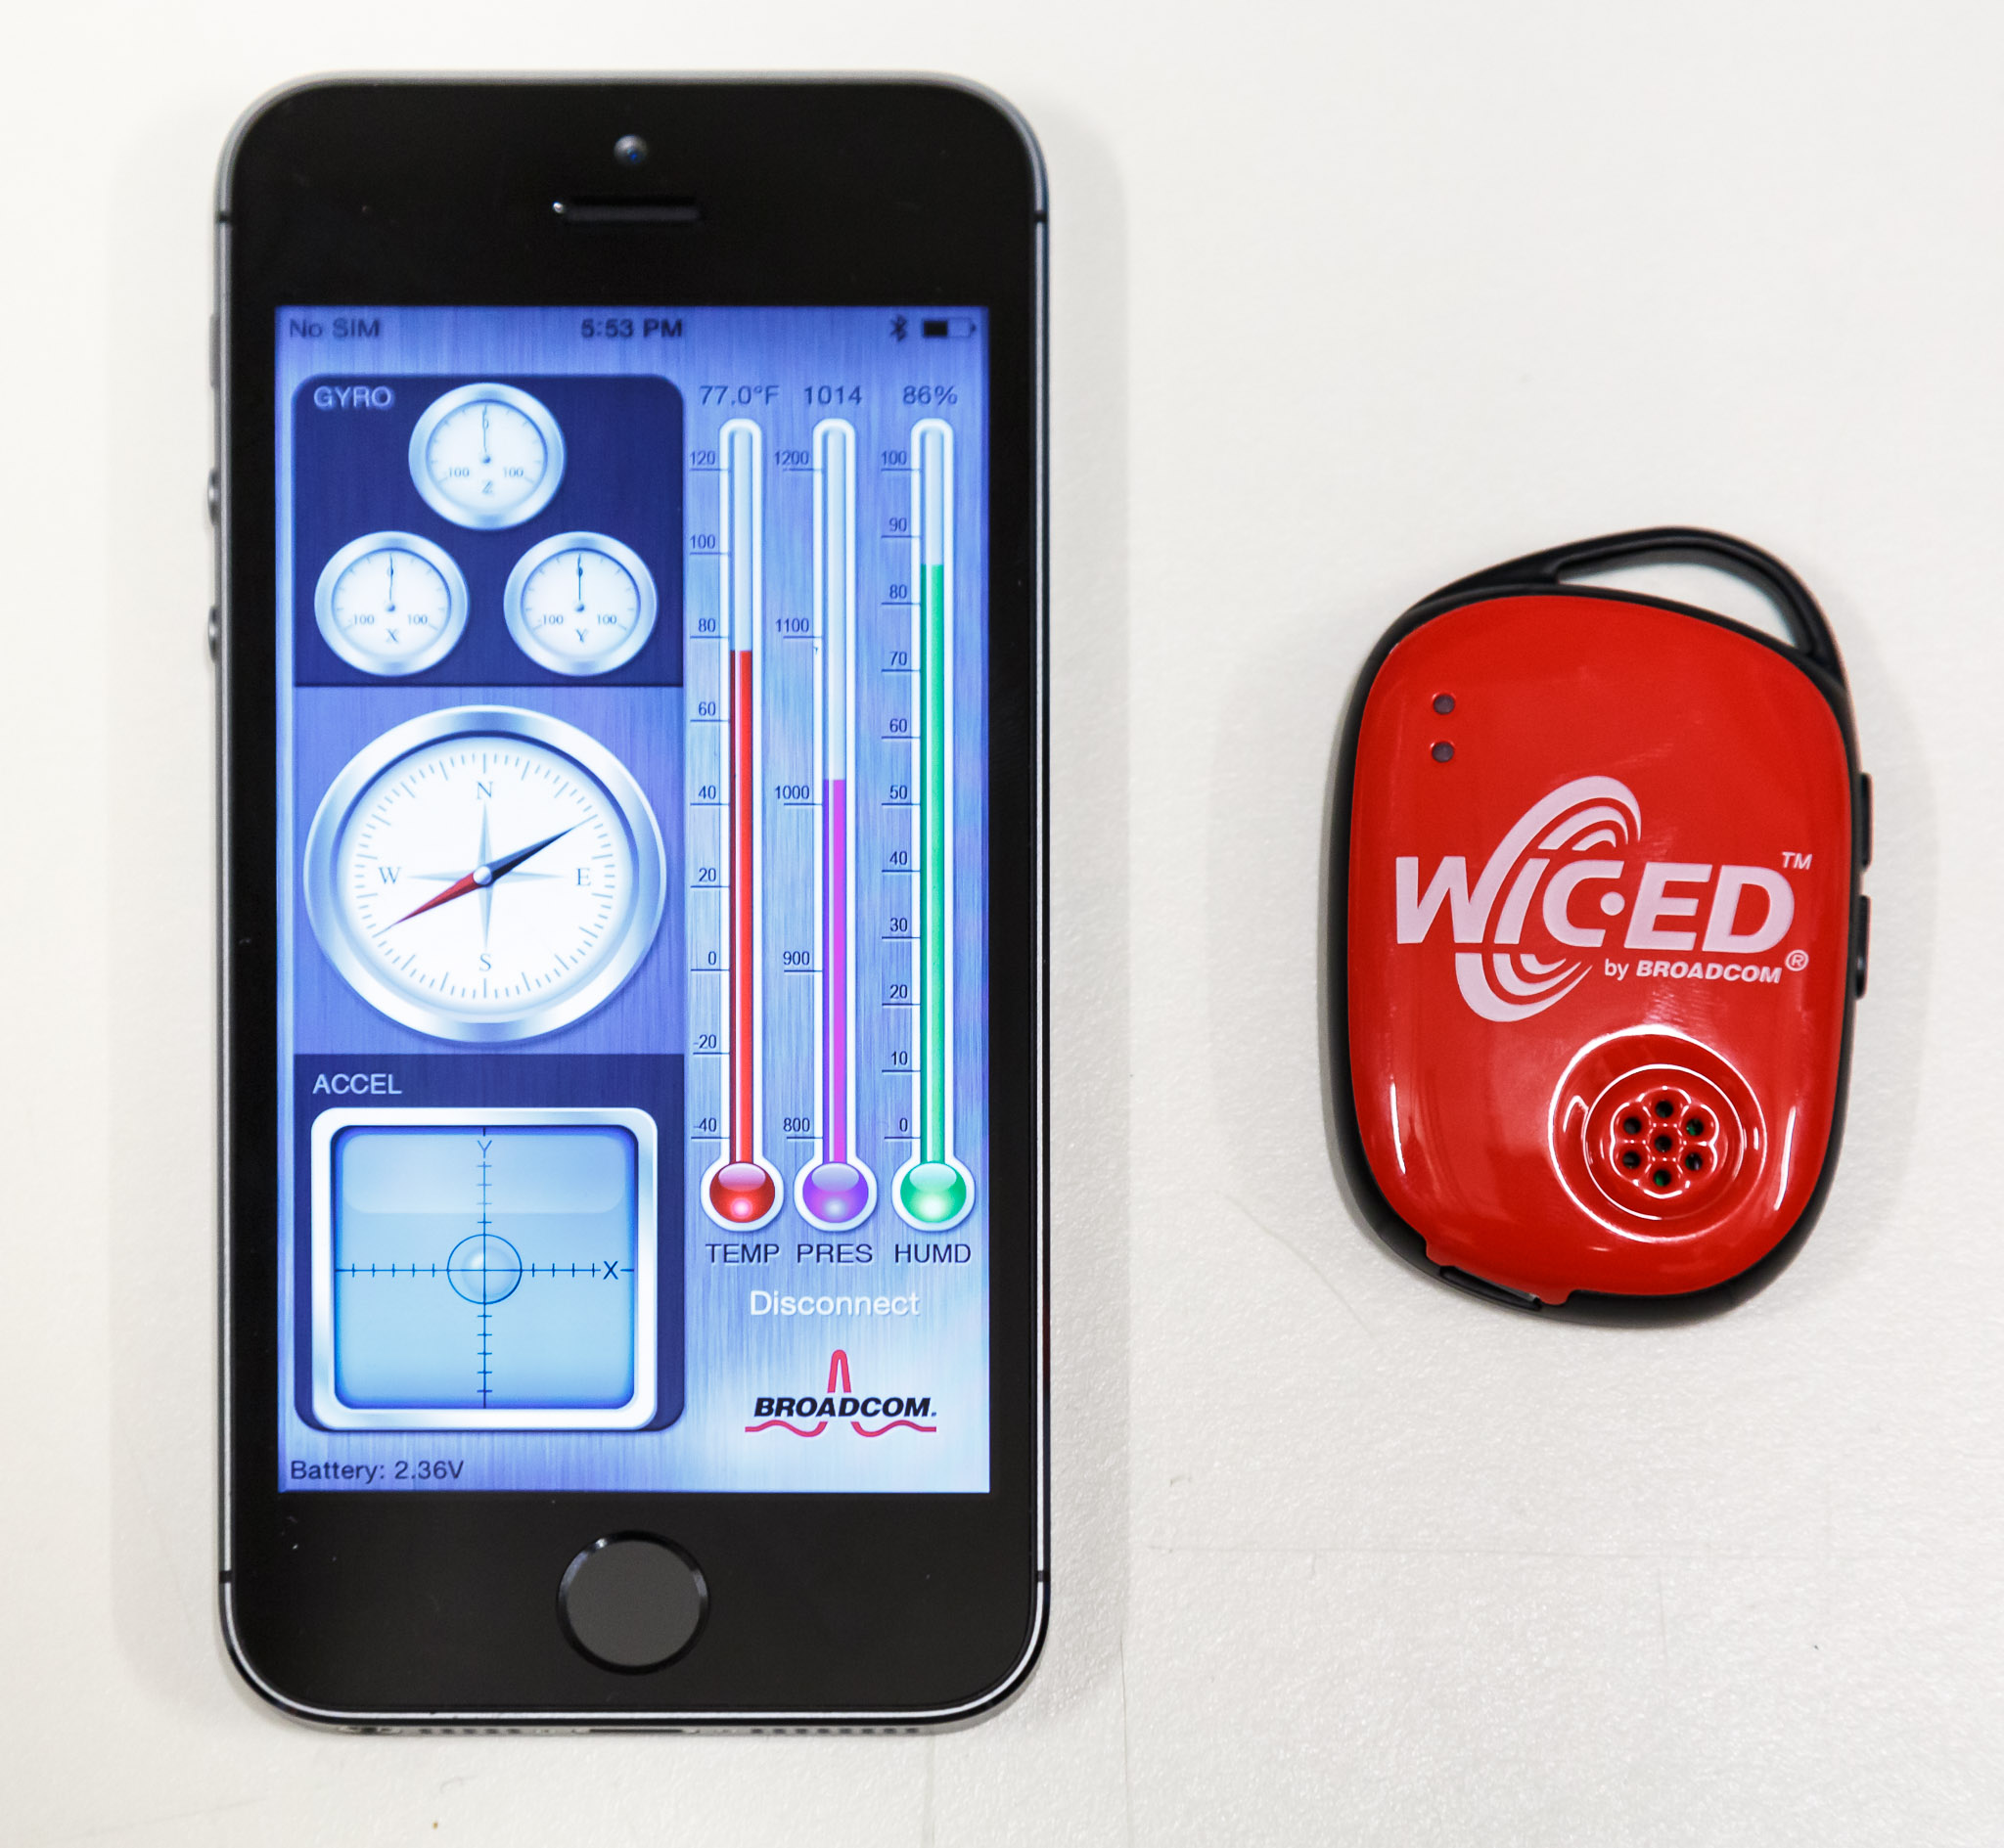 Broadcom's Wiced Sense Kit is combines a thermometer, accelerator, gyroscope, compass, and humidity and pressure sensors into a $20 package for developers to build Internet-of-Things prototype devices.